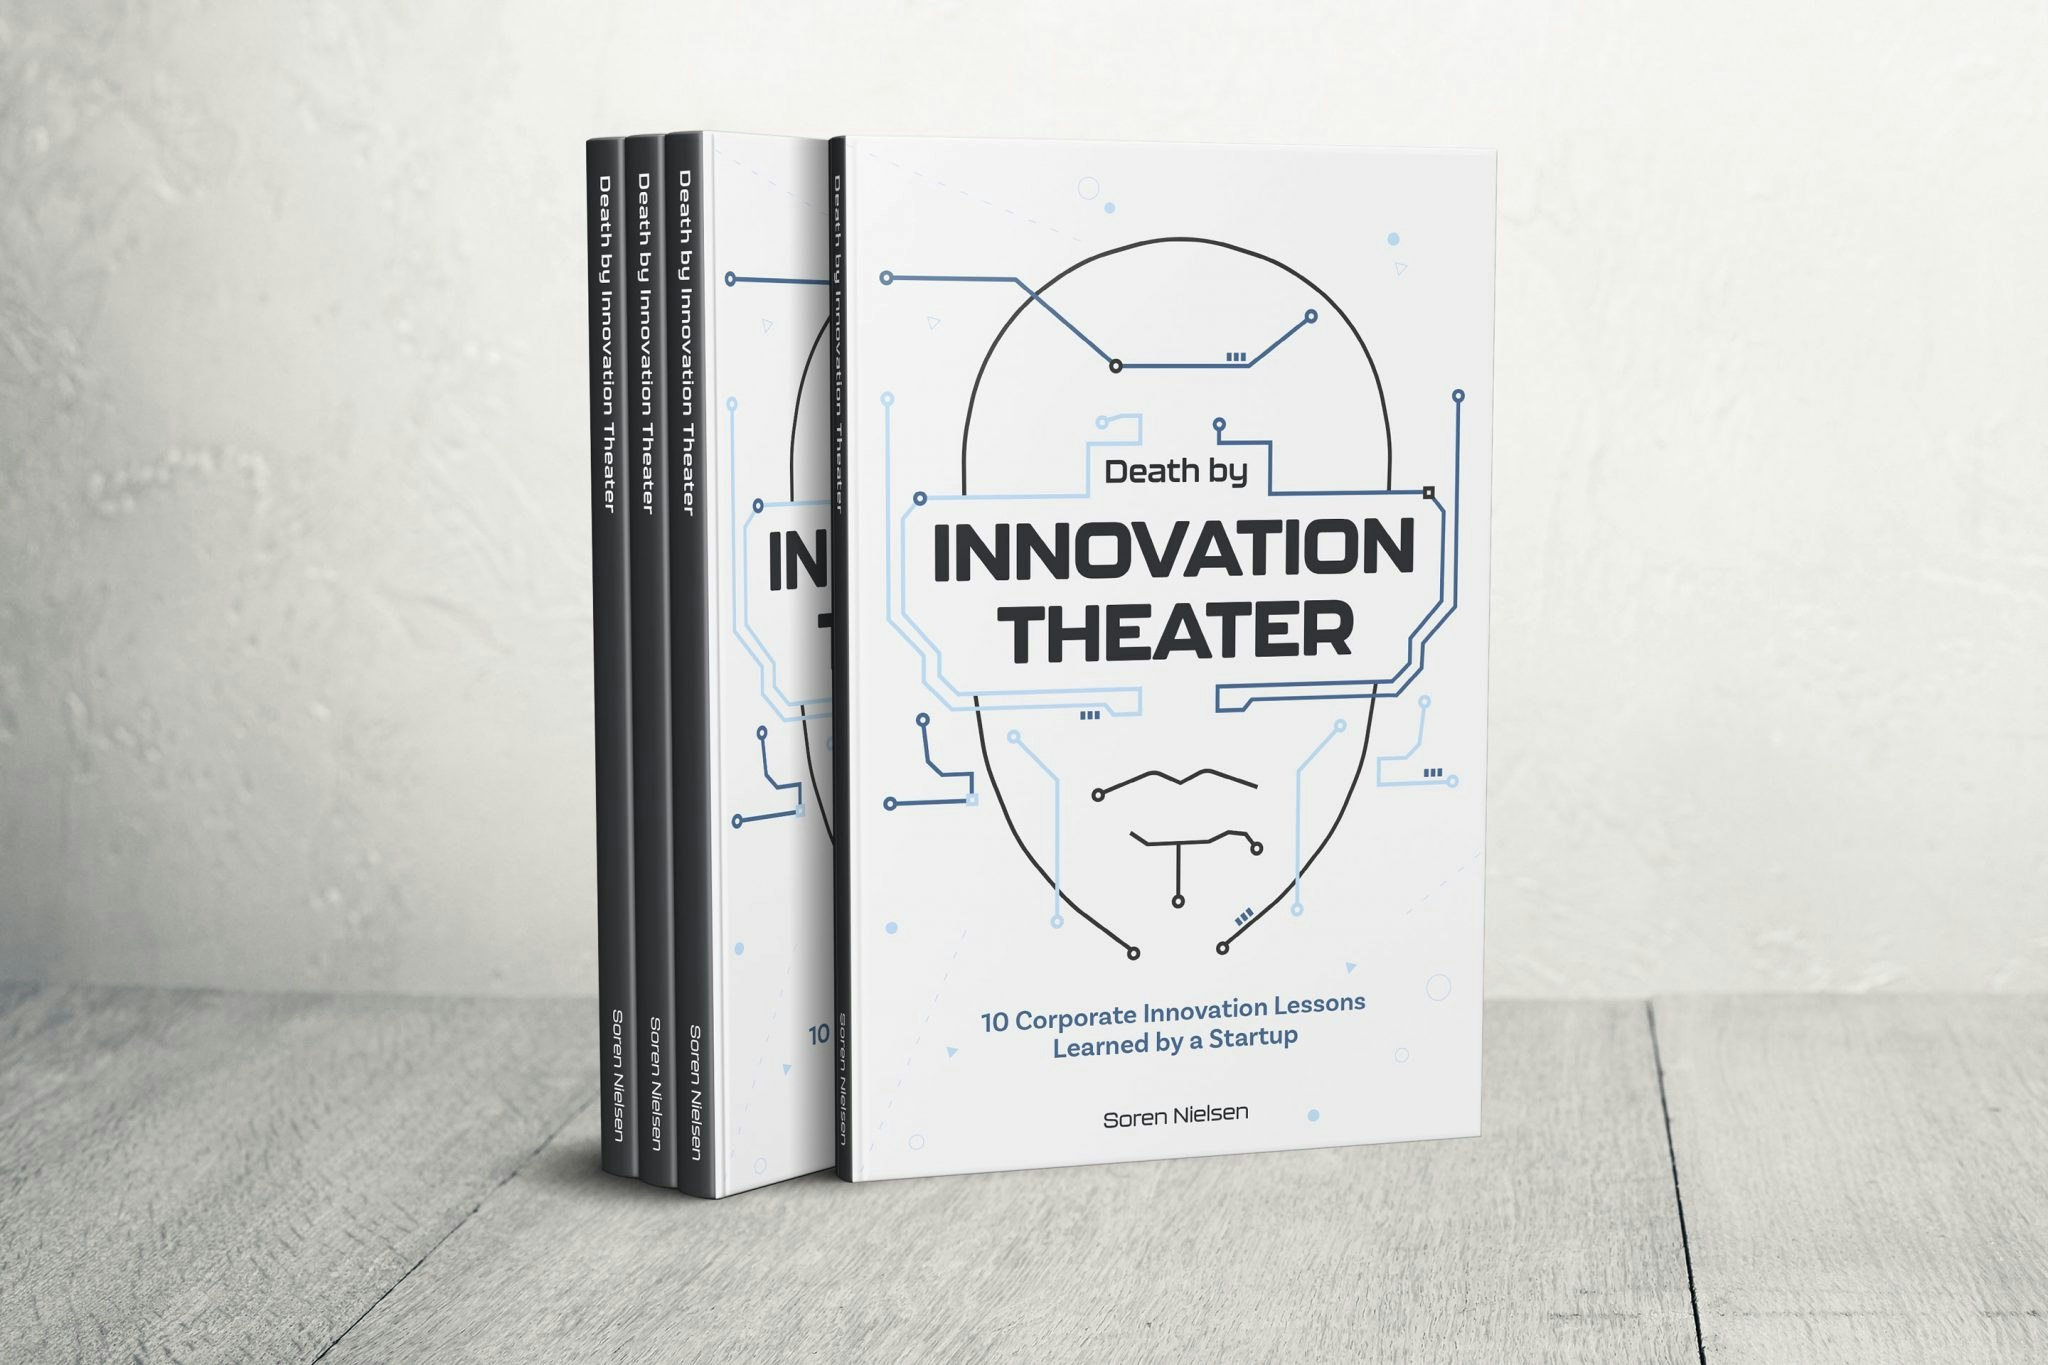 Death by innovation theater